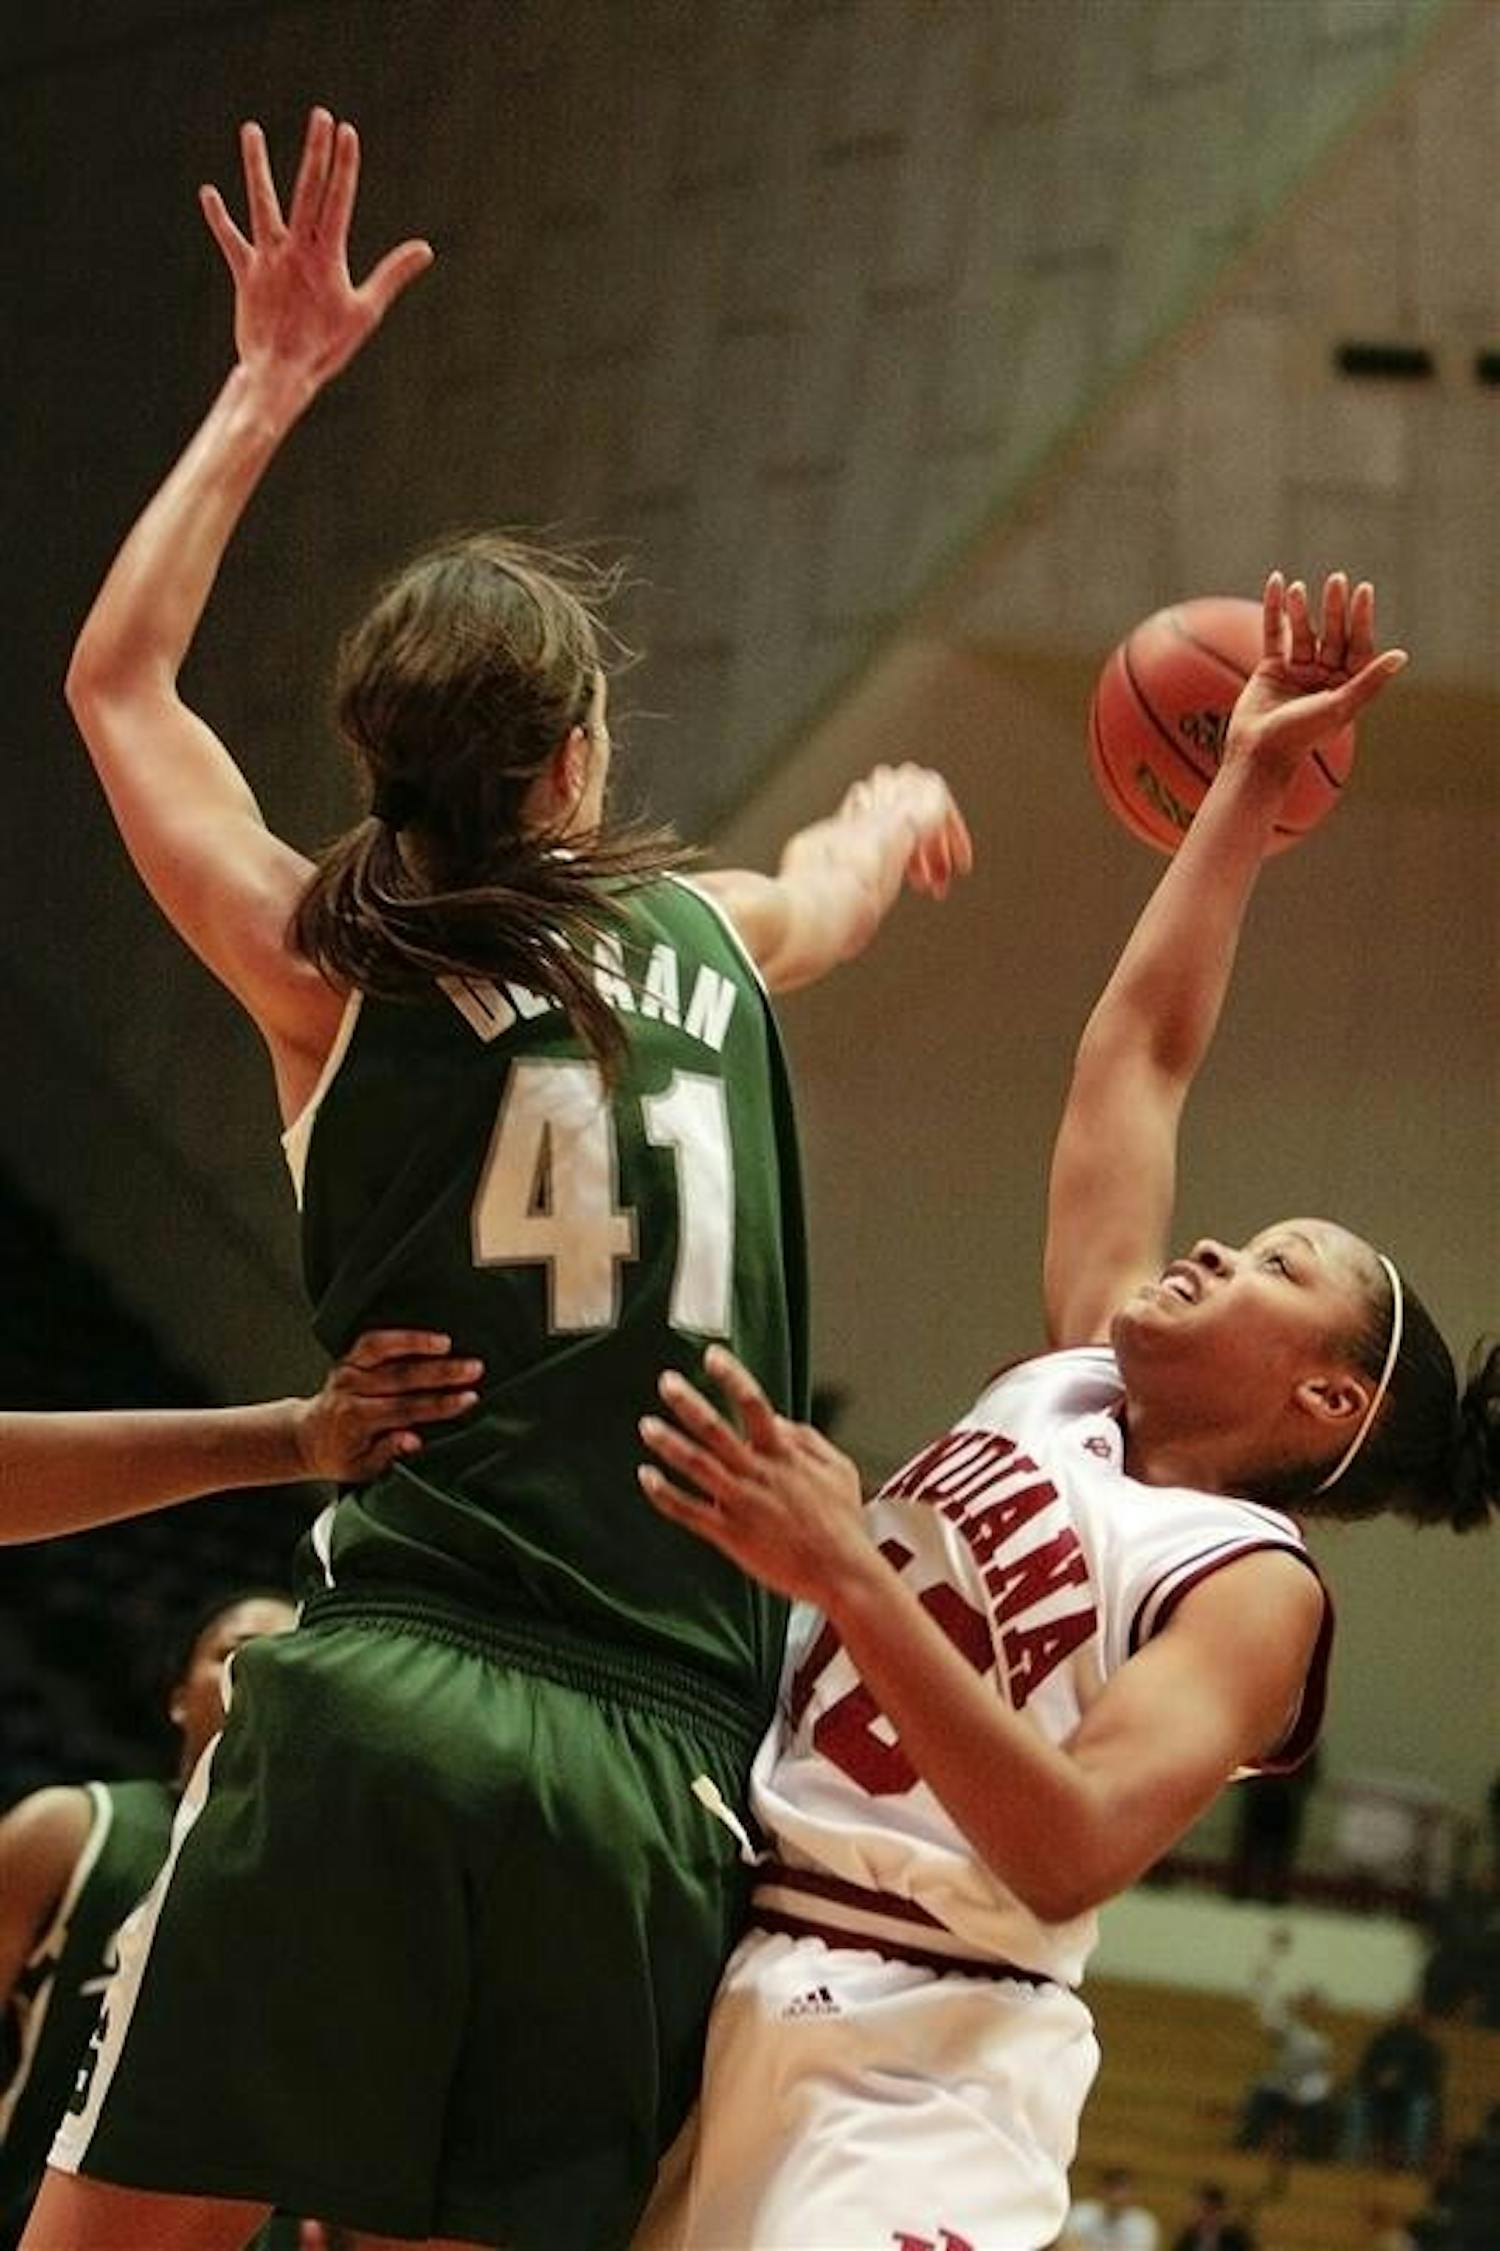 Sophomore guard Andrea McGuirt has her shot rejected by Michigan State's 6-foot-9-inch center Allyssa DeHann during the Hoosiers 71-65 loss to the Spartans February 12 at Assembly Hall.